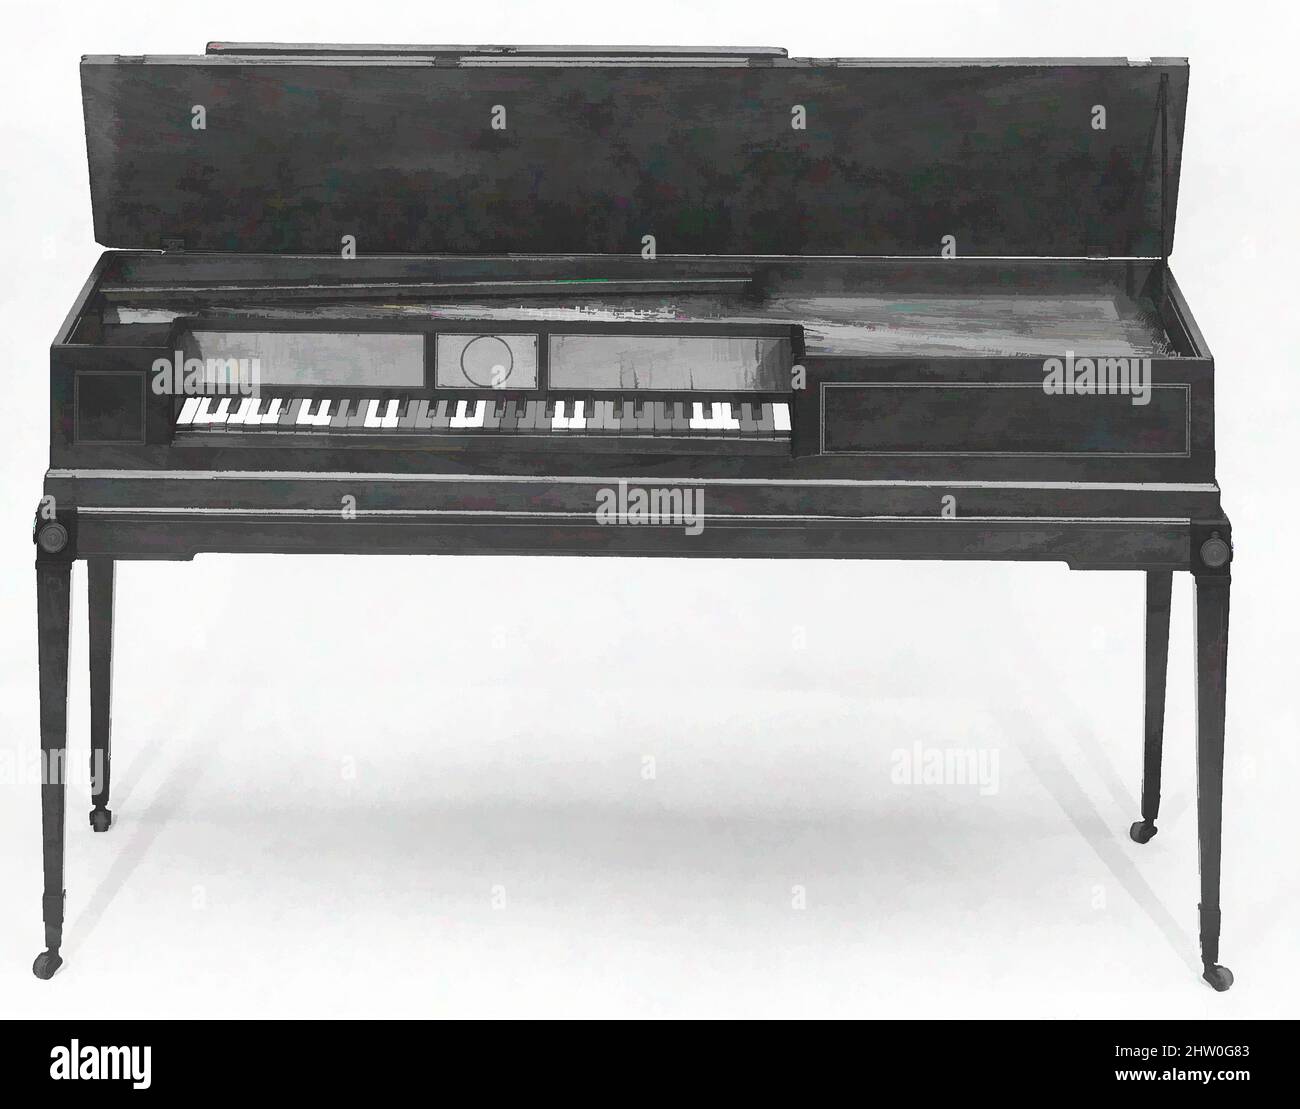 Art inspired by Square Piano, ca. 1791, New York, New York, United States, American, Mahogany, iron, stained hardwood, ivory, bone, various materials, Case length: 157.8 cm, Chordophone-Zither-struck-piano, Dodds & Claus, The piano makers Thomas Dodds and Christian Claus are, Classic works modernized by Artotop with a splash of modernity. Shapes, color and value, eye-catching visual impact on art. Emotions through freedom of artworks in a contemporary way. A timeless message pursuing a wildly creative new direction. Artists turning to the digital medium and creating the Artotop NFT Stock Photo